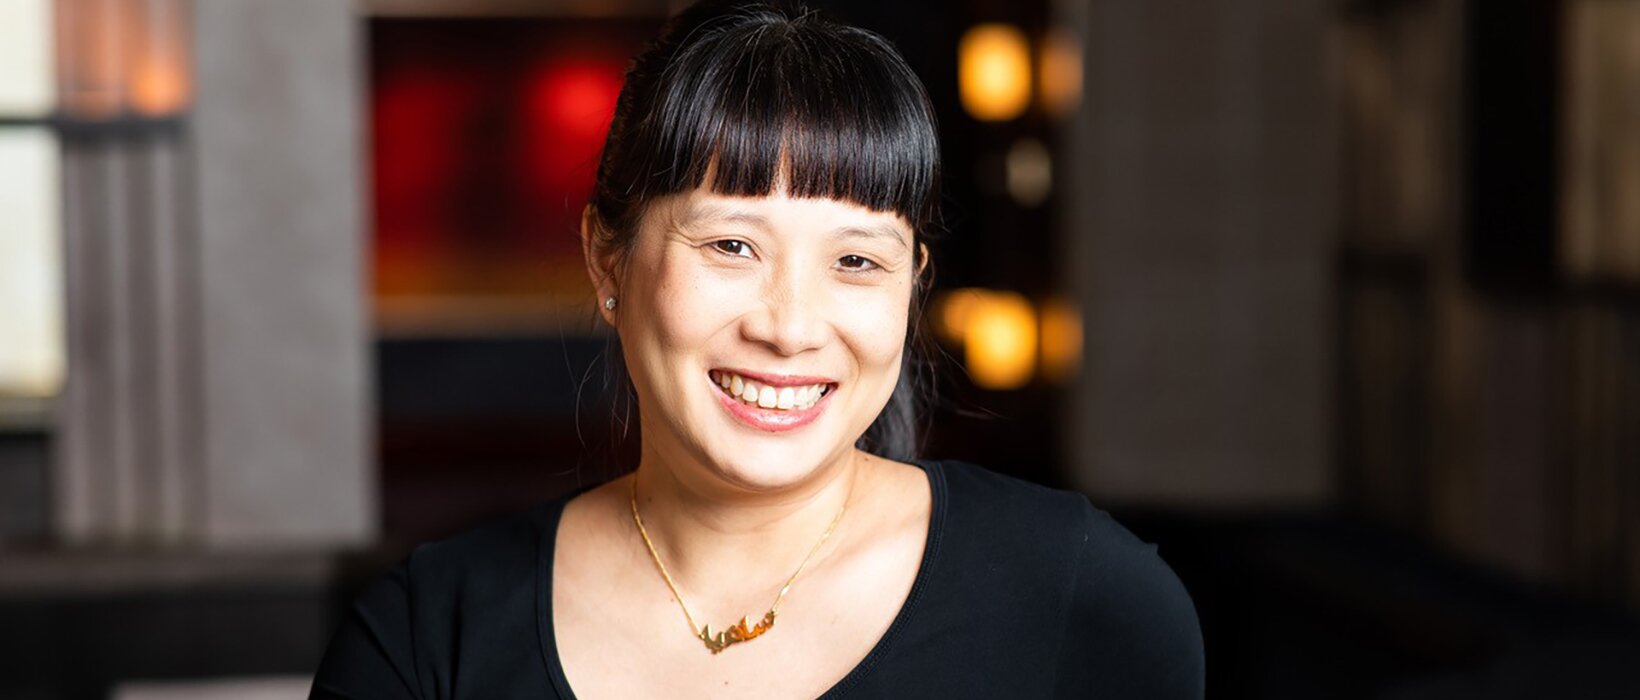 Raise a glass with: Sandia Chang, founder of Bubbleshop and co-founder of Kitchen Table